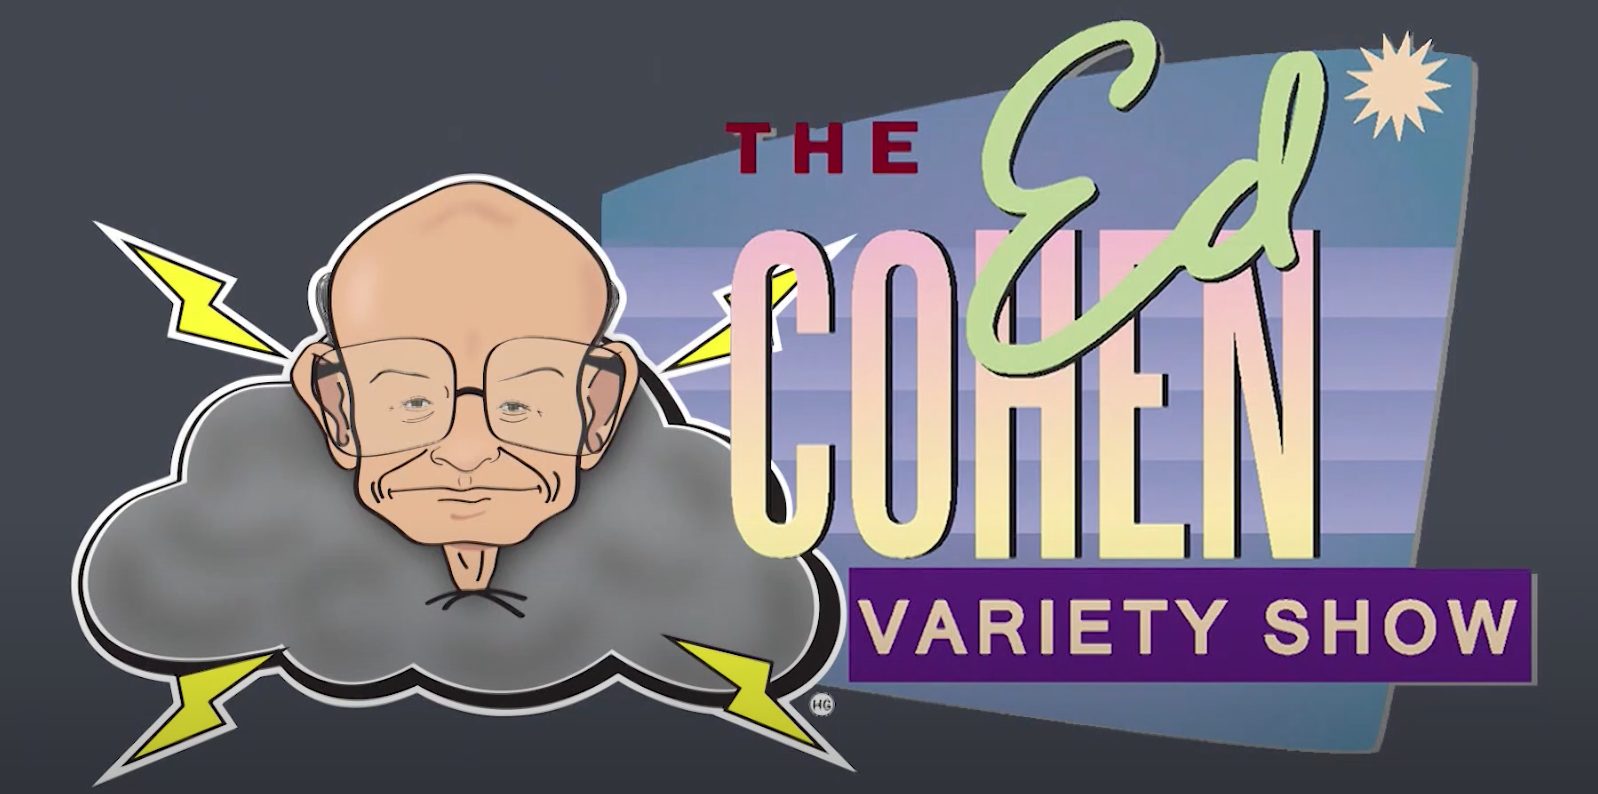 ed cohen variety show